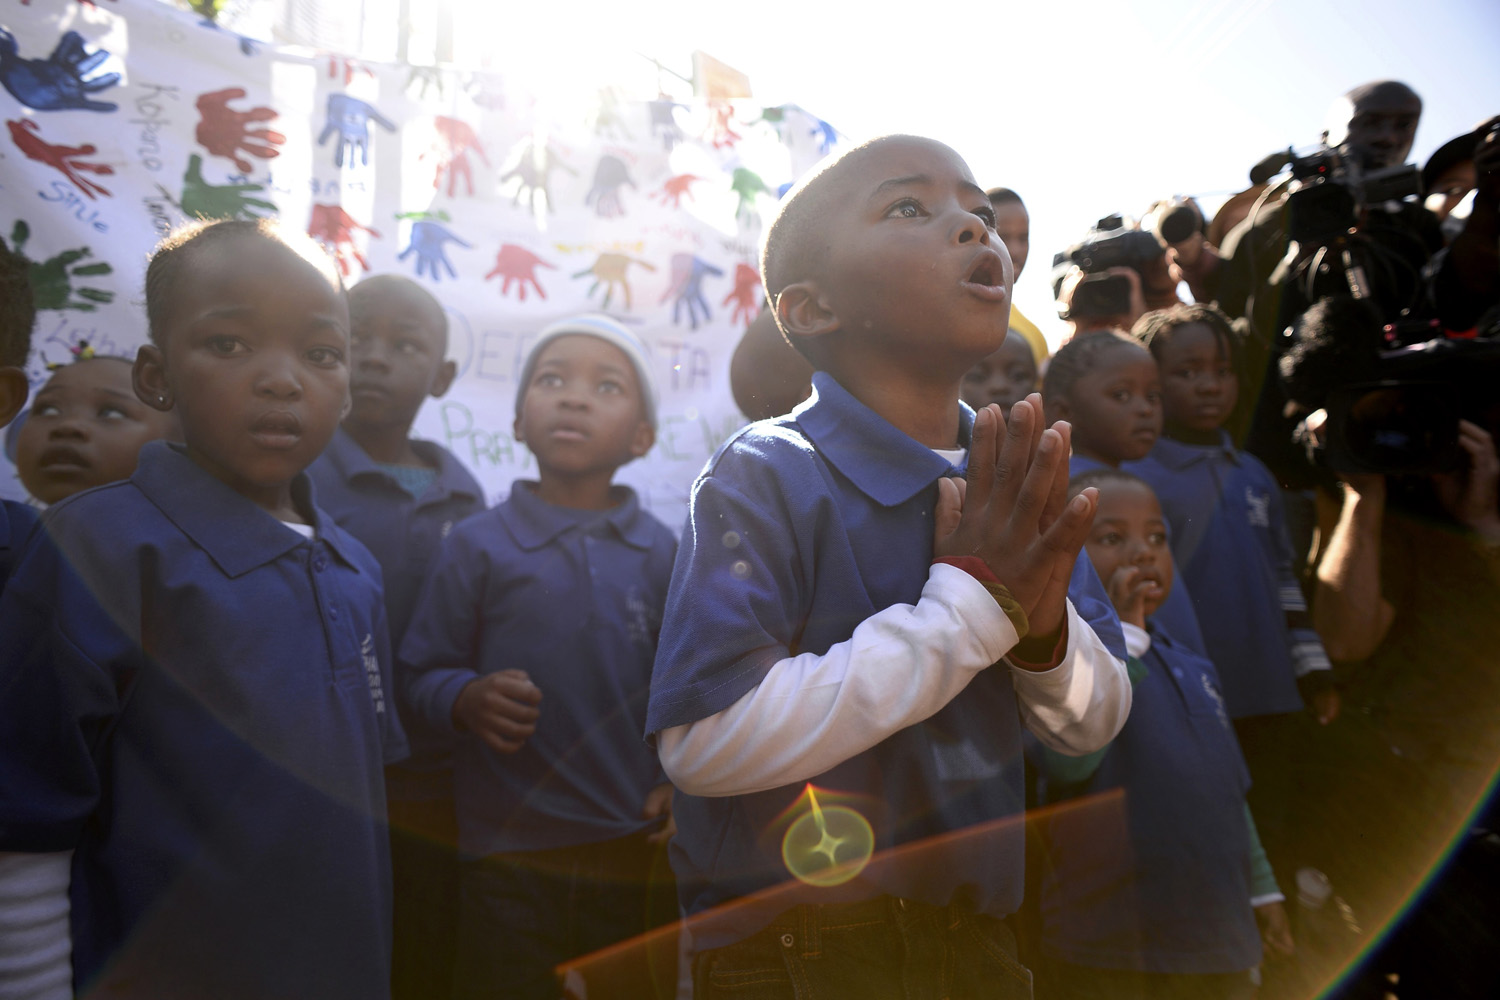 A student chants a prayer as his class visits Medi-Clinic Heart Hospital to pay respect where ailing former South African President Nelson Mandela is being treated in Pretoria